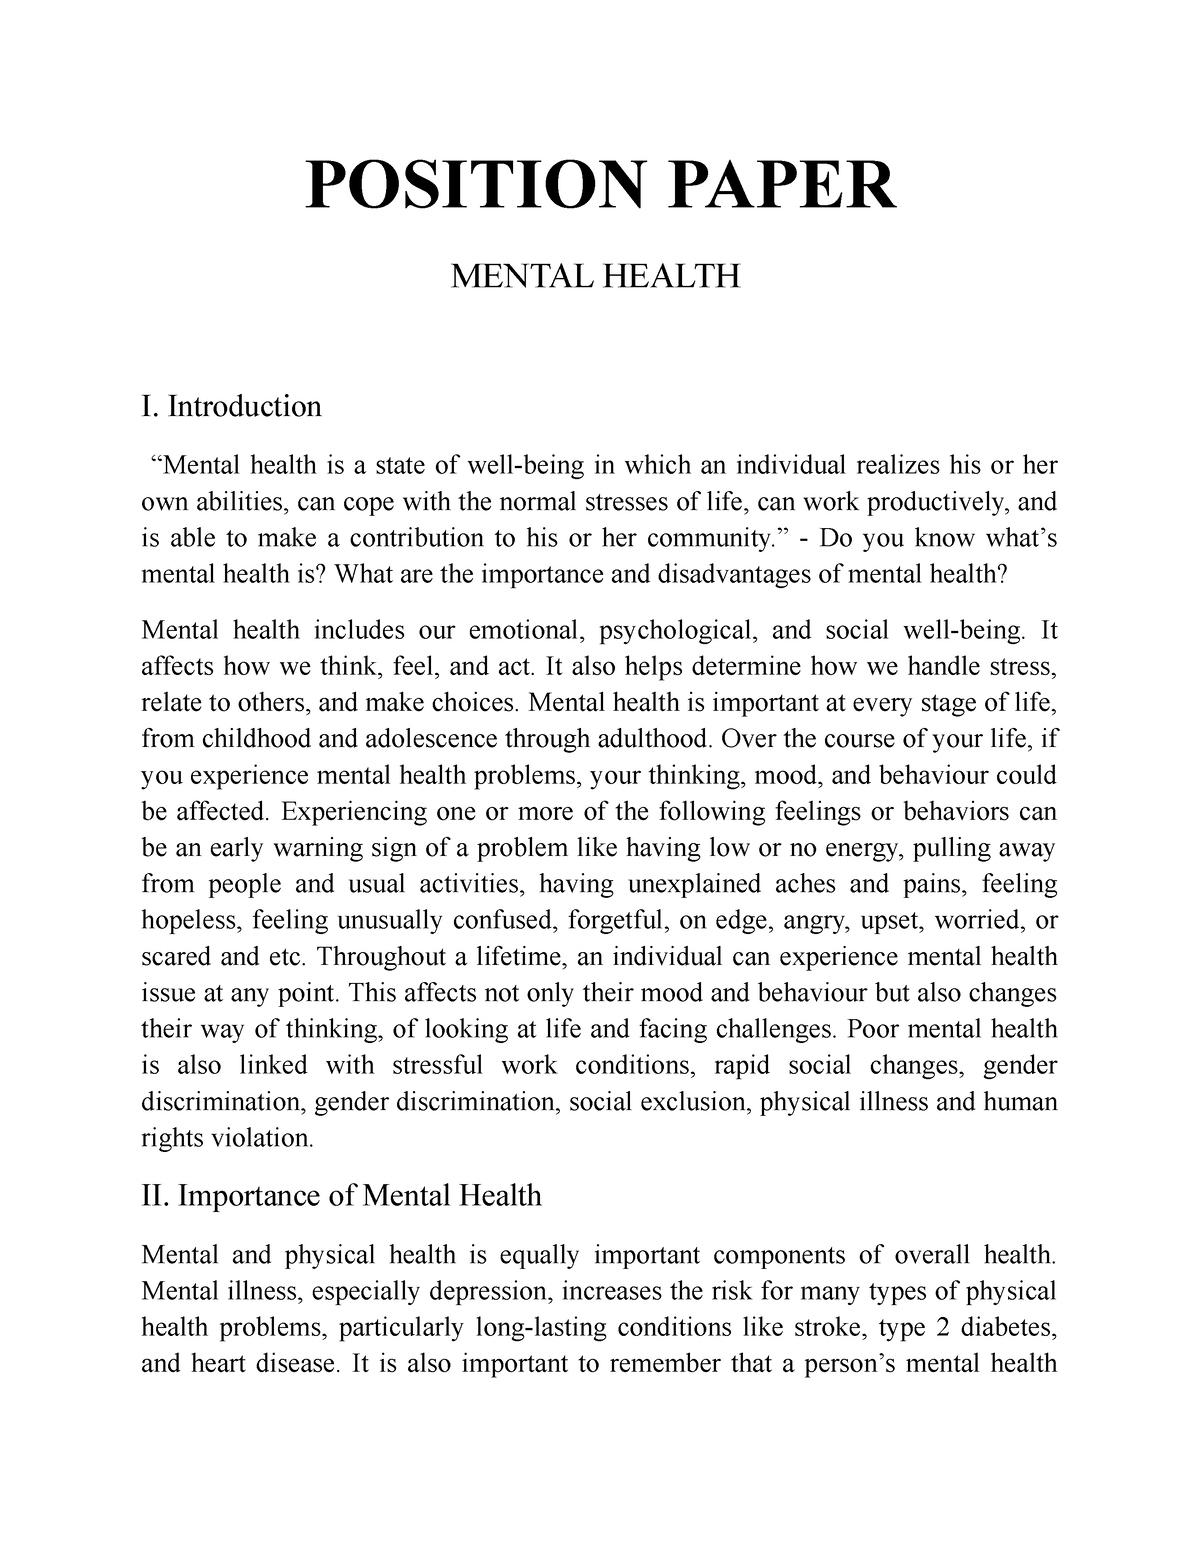 example research paper on mental health